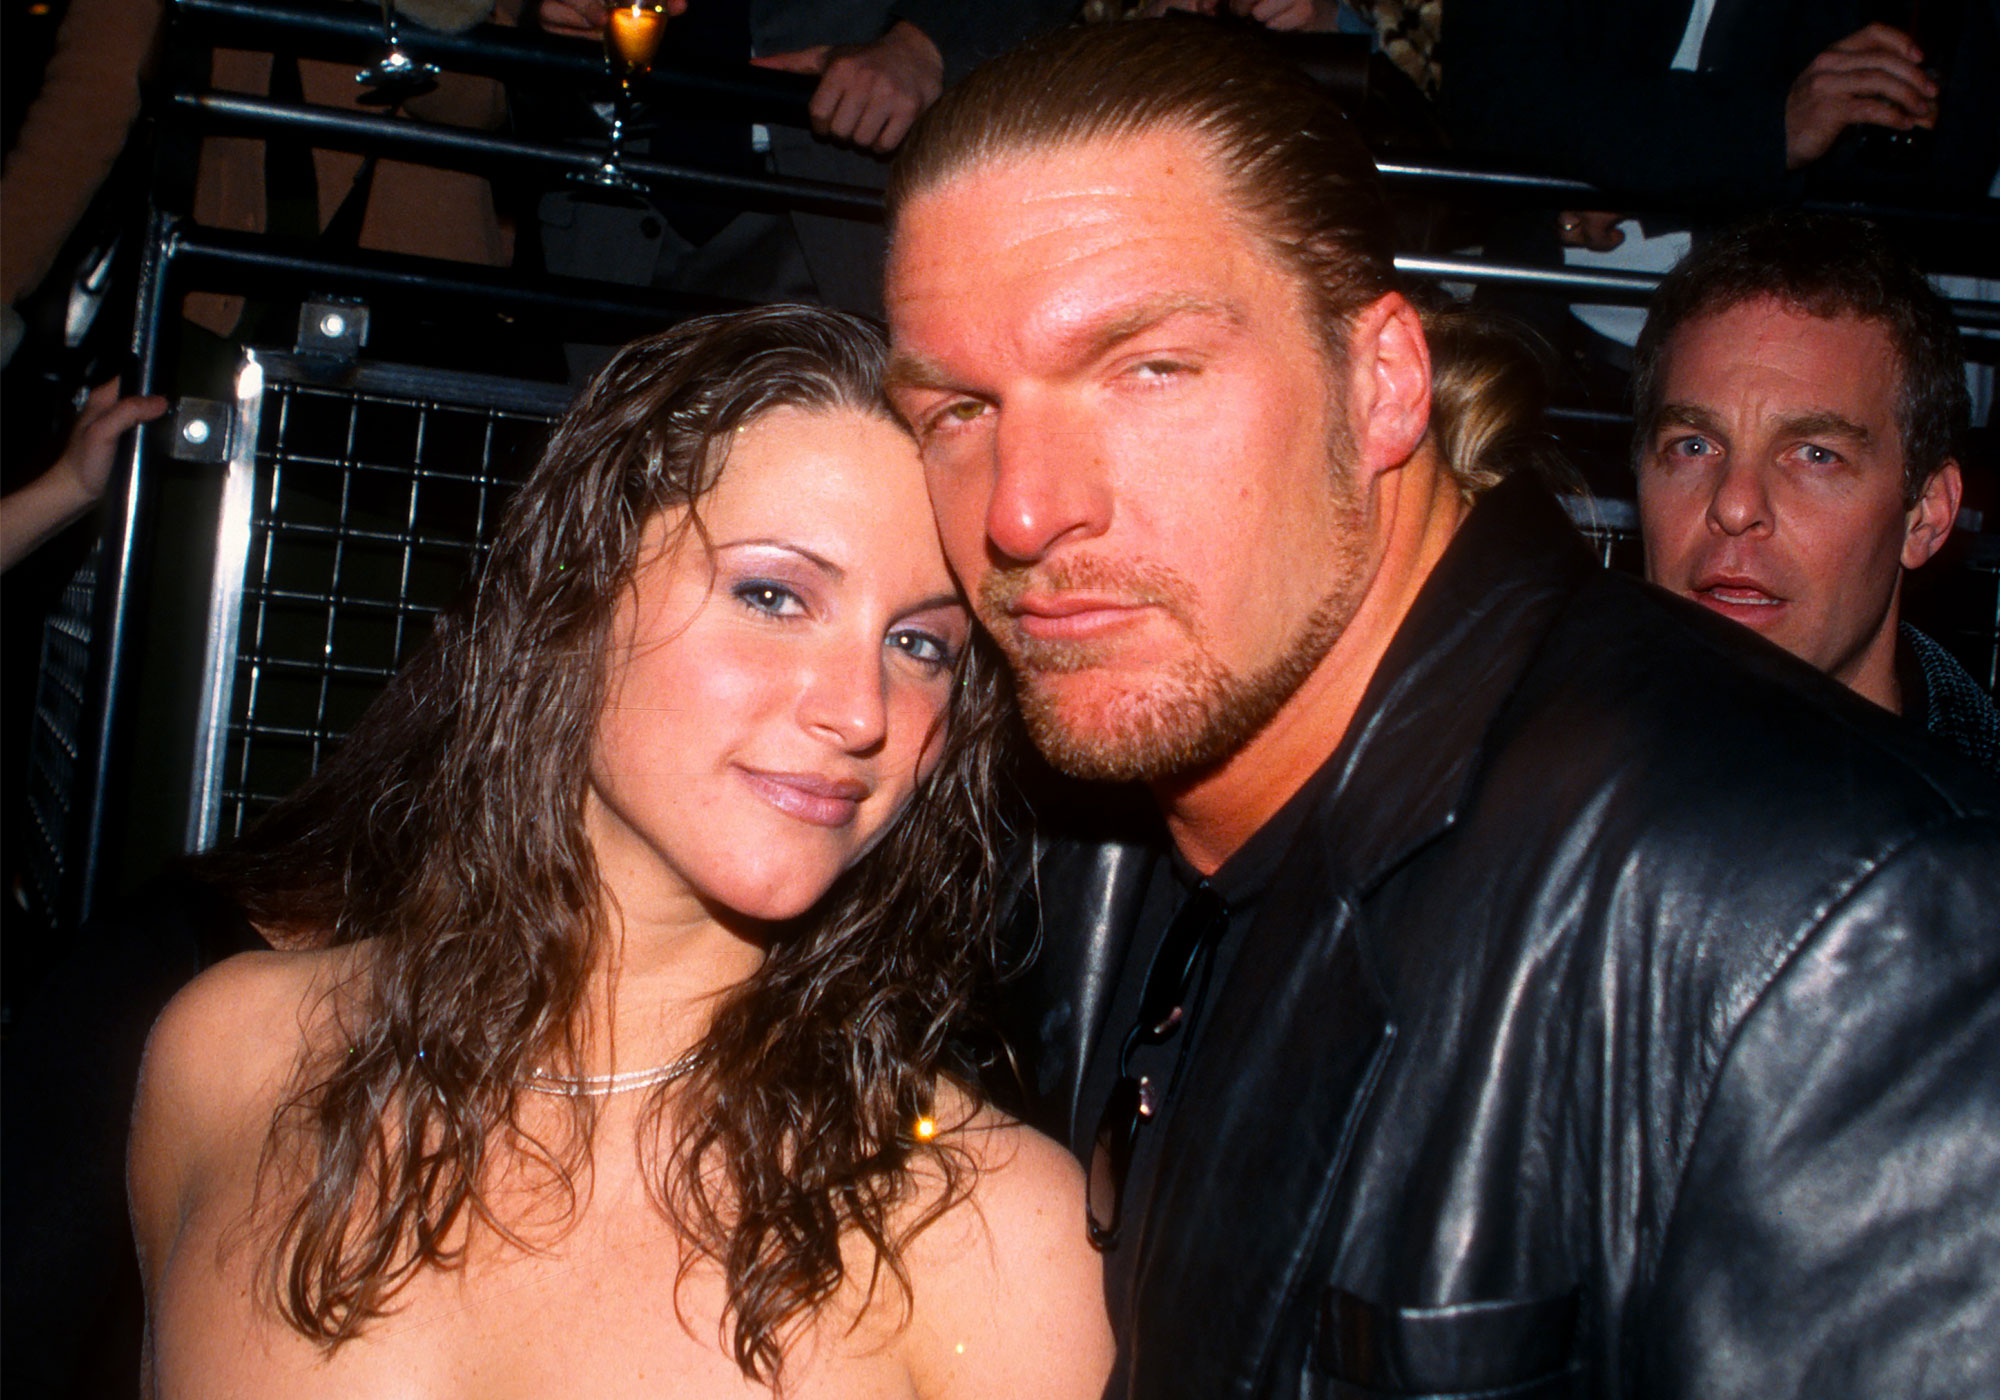 Wwe Stephanie Mcmahon Sex Hd - WWE's Stephanie McMahon and Wrestler Triple H's Relationship Timeline